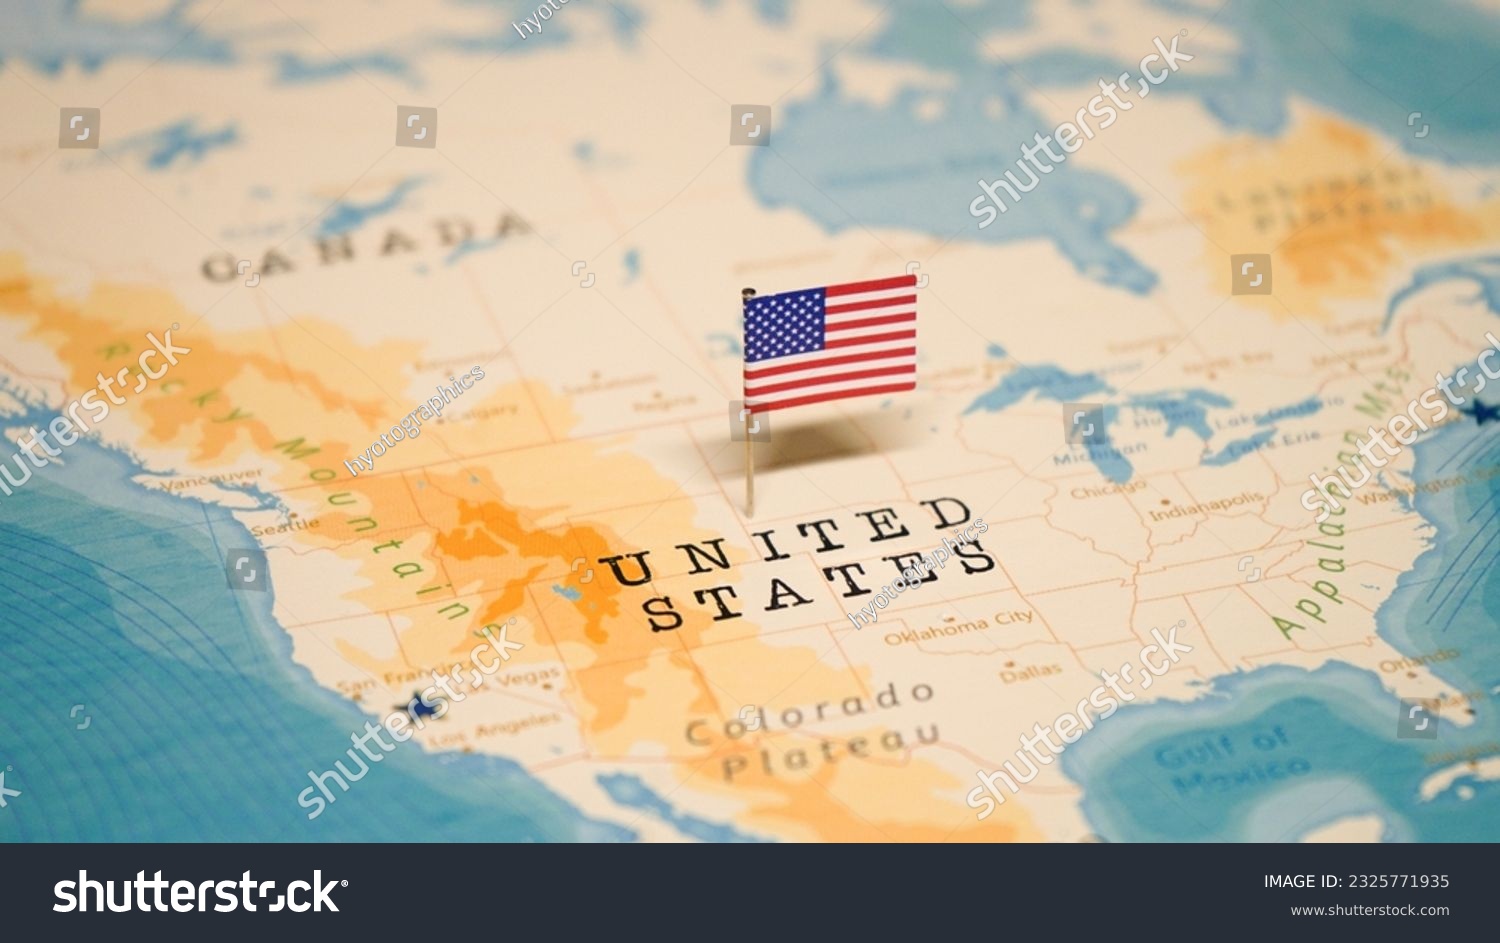 The Flag of United States on the World Map. #2325771935